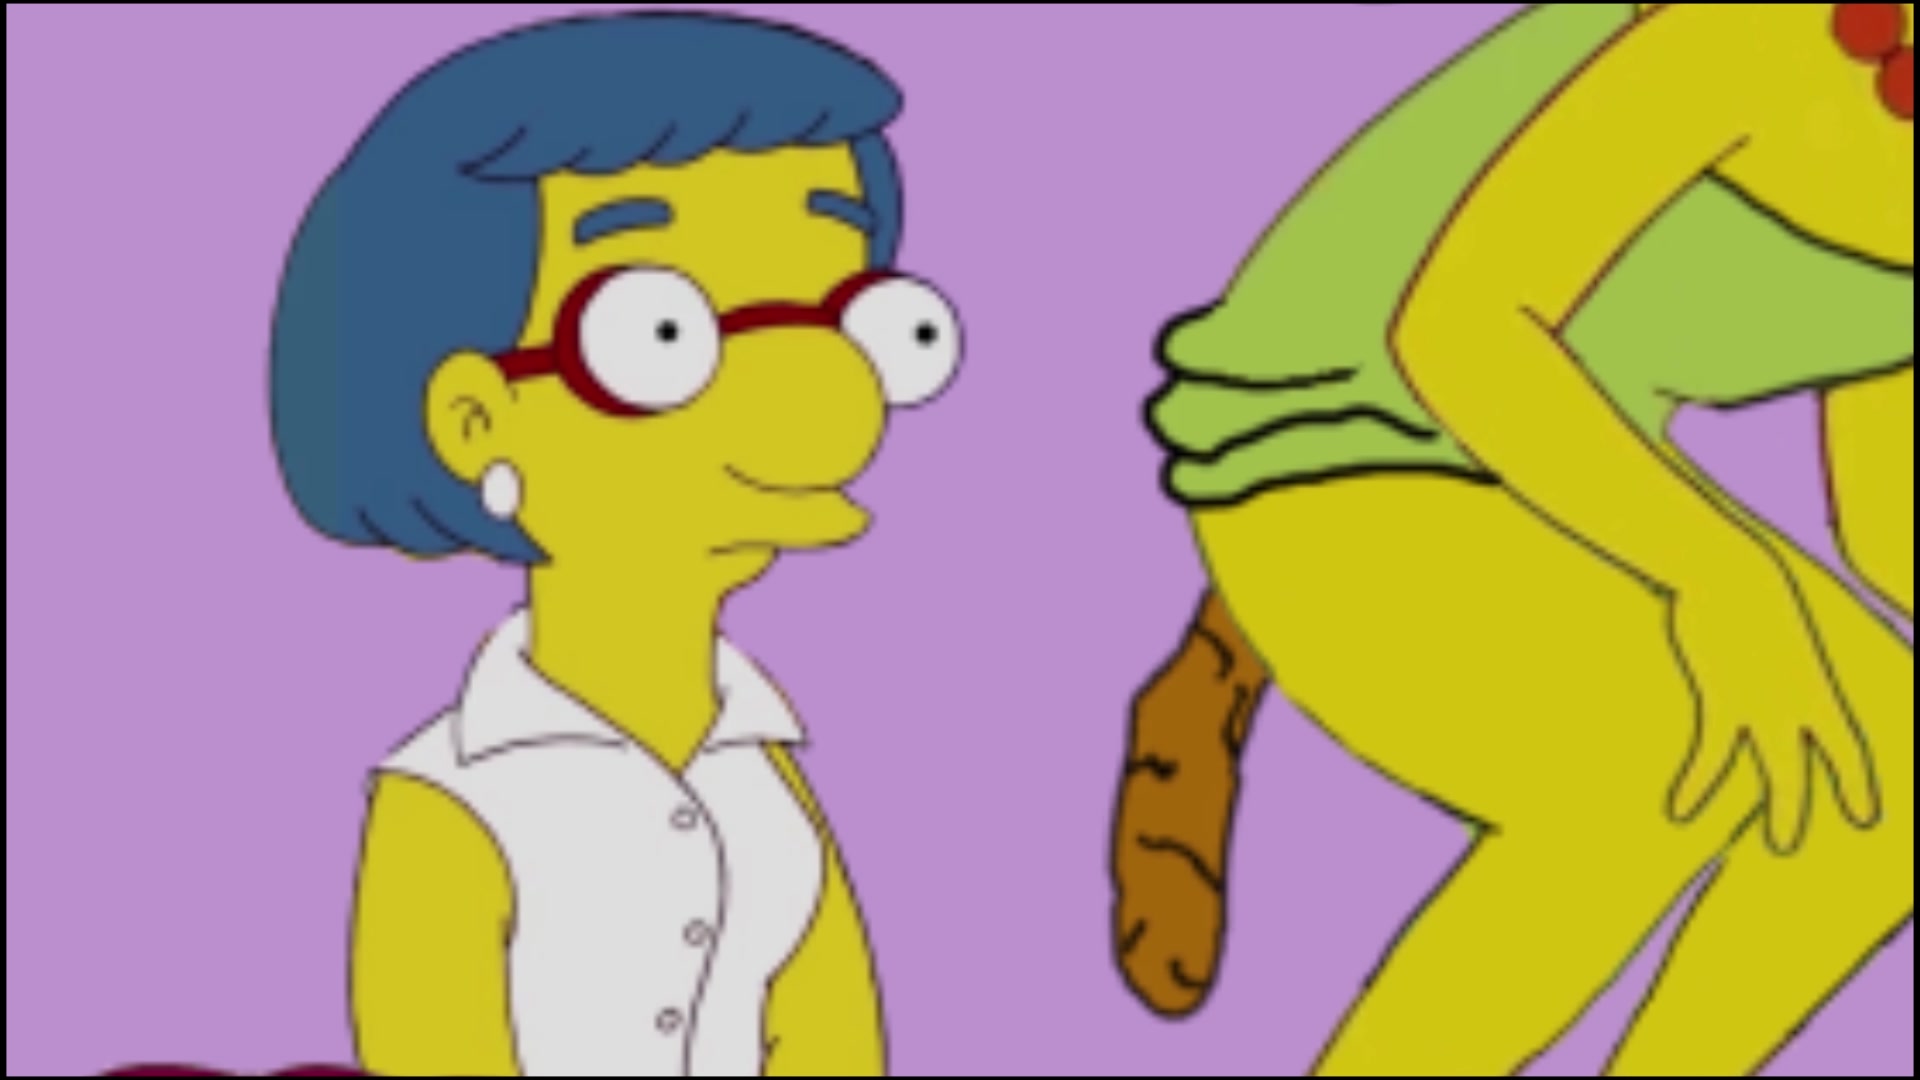 Pooping Cartoon Porn Simpson - Cartoon Scat - Episode 02 : Marge et Luann - ScatFap.com - scat porn search  - FREE videos of extreme kaviar and copro sex, dirty shit eating and  smearing